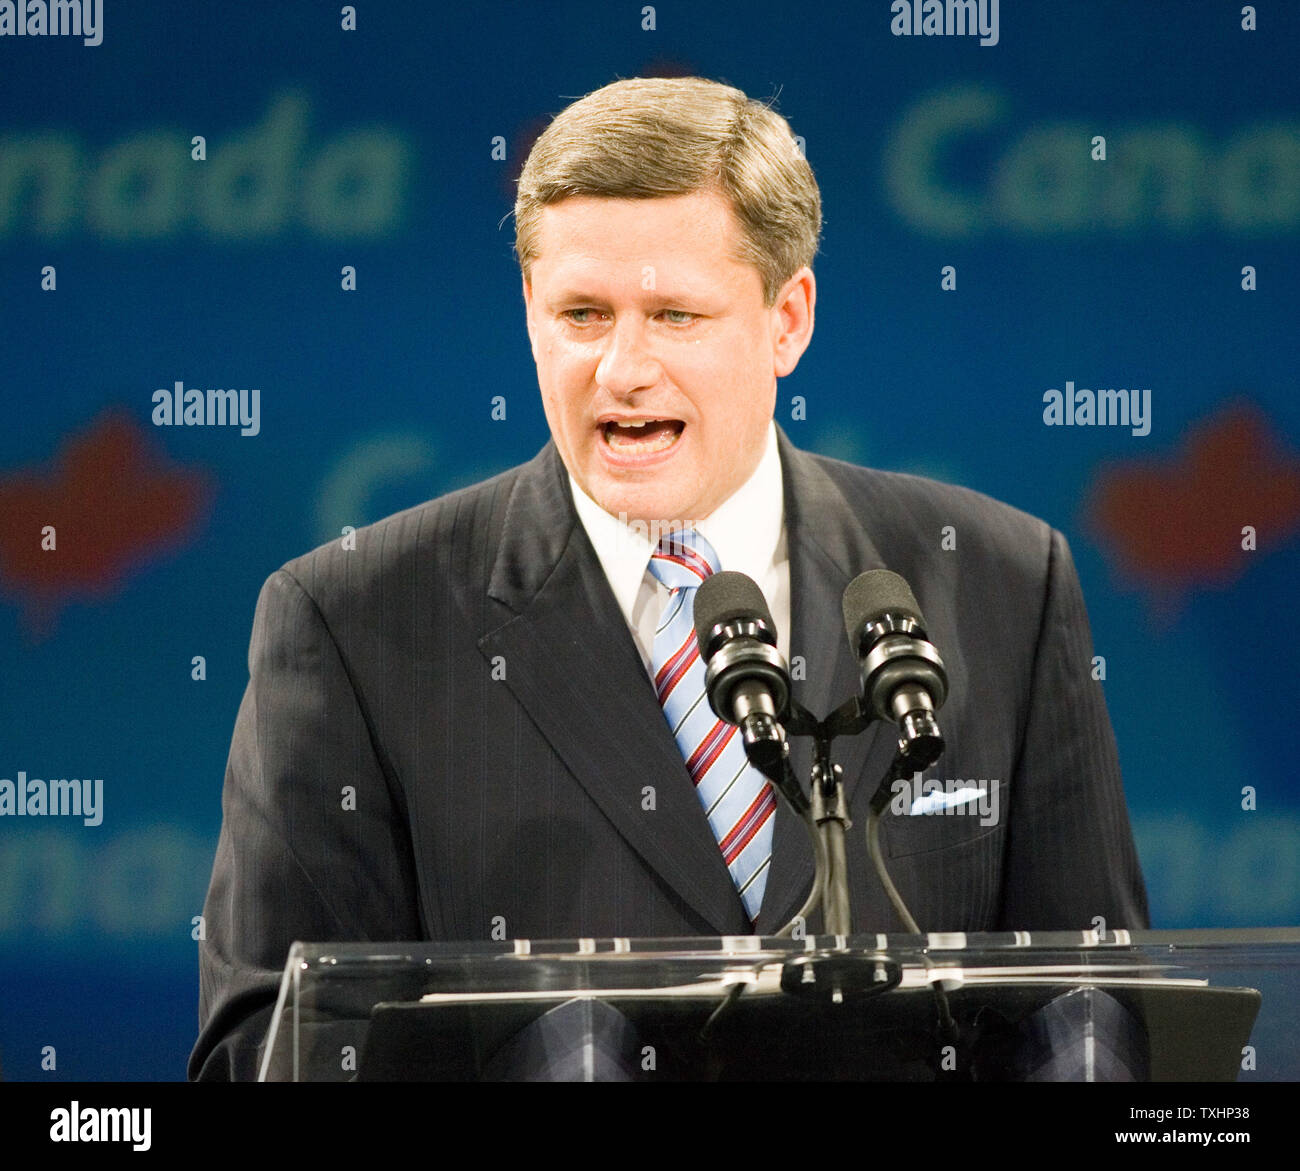 Federal Conservative leader Stephen Harper gives his victory speech to supporters at his campaign headquarters in the Telus Center in Calgary, Alberta after winning the Canada federal election with a minority, January 23, 2006. (UPI Photo/Heinz Ruckemann) Stock Photo